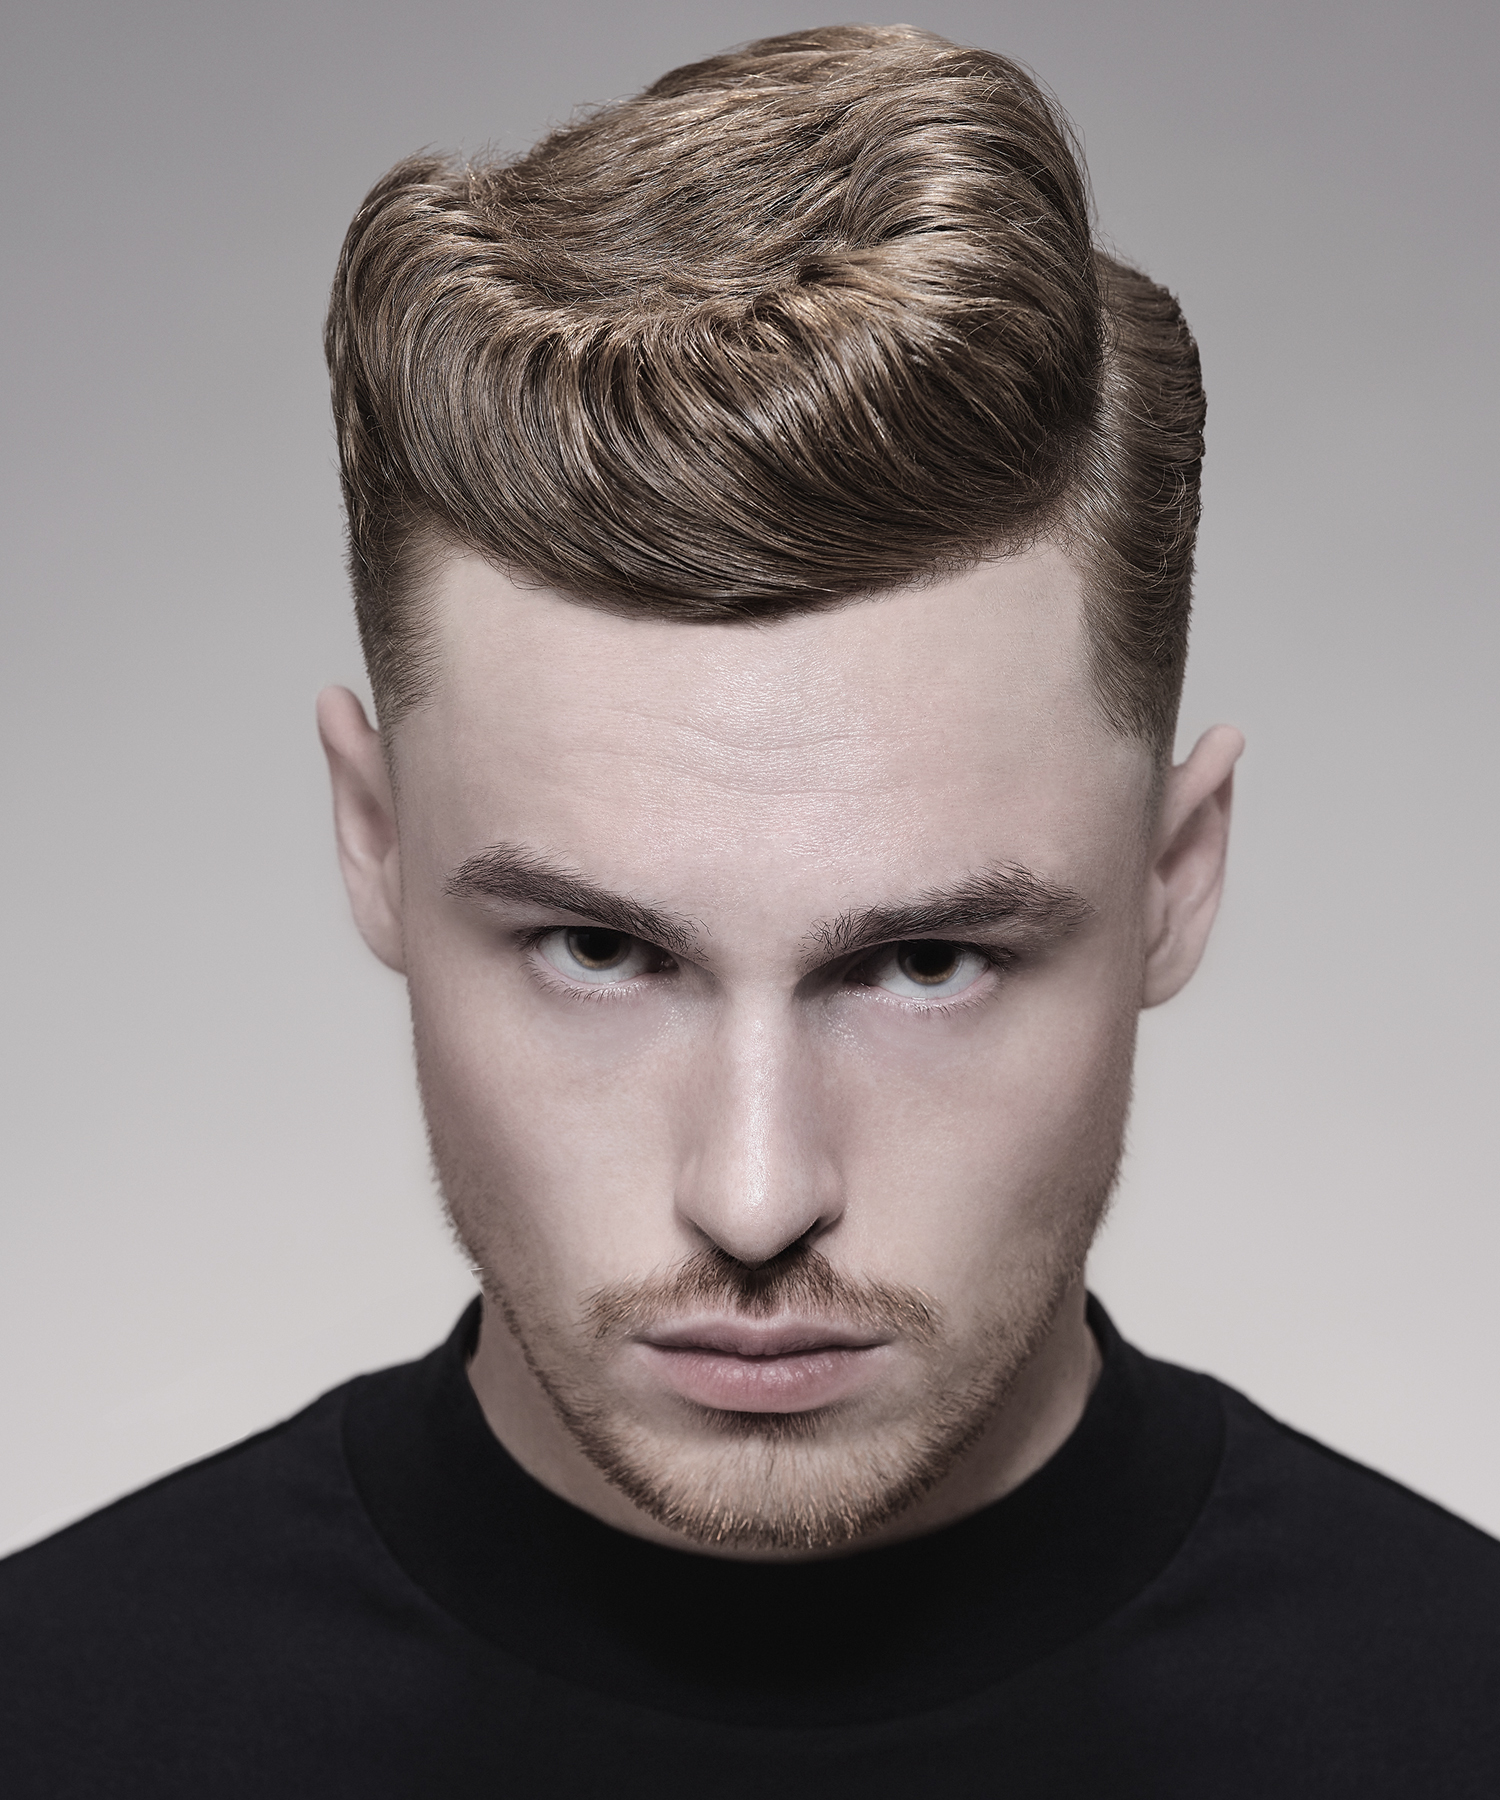 Dean Gleeson Hair Collection. Dean will be on the live stage at HairCon.